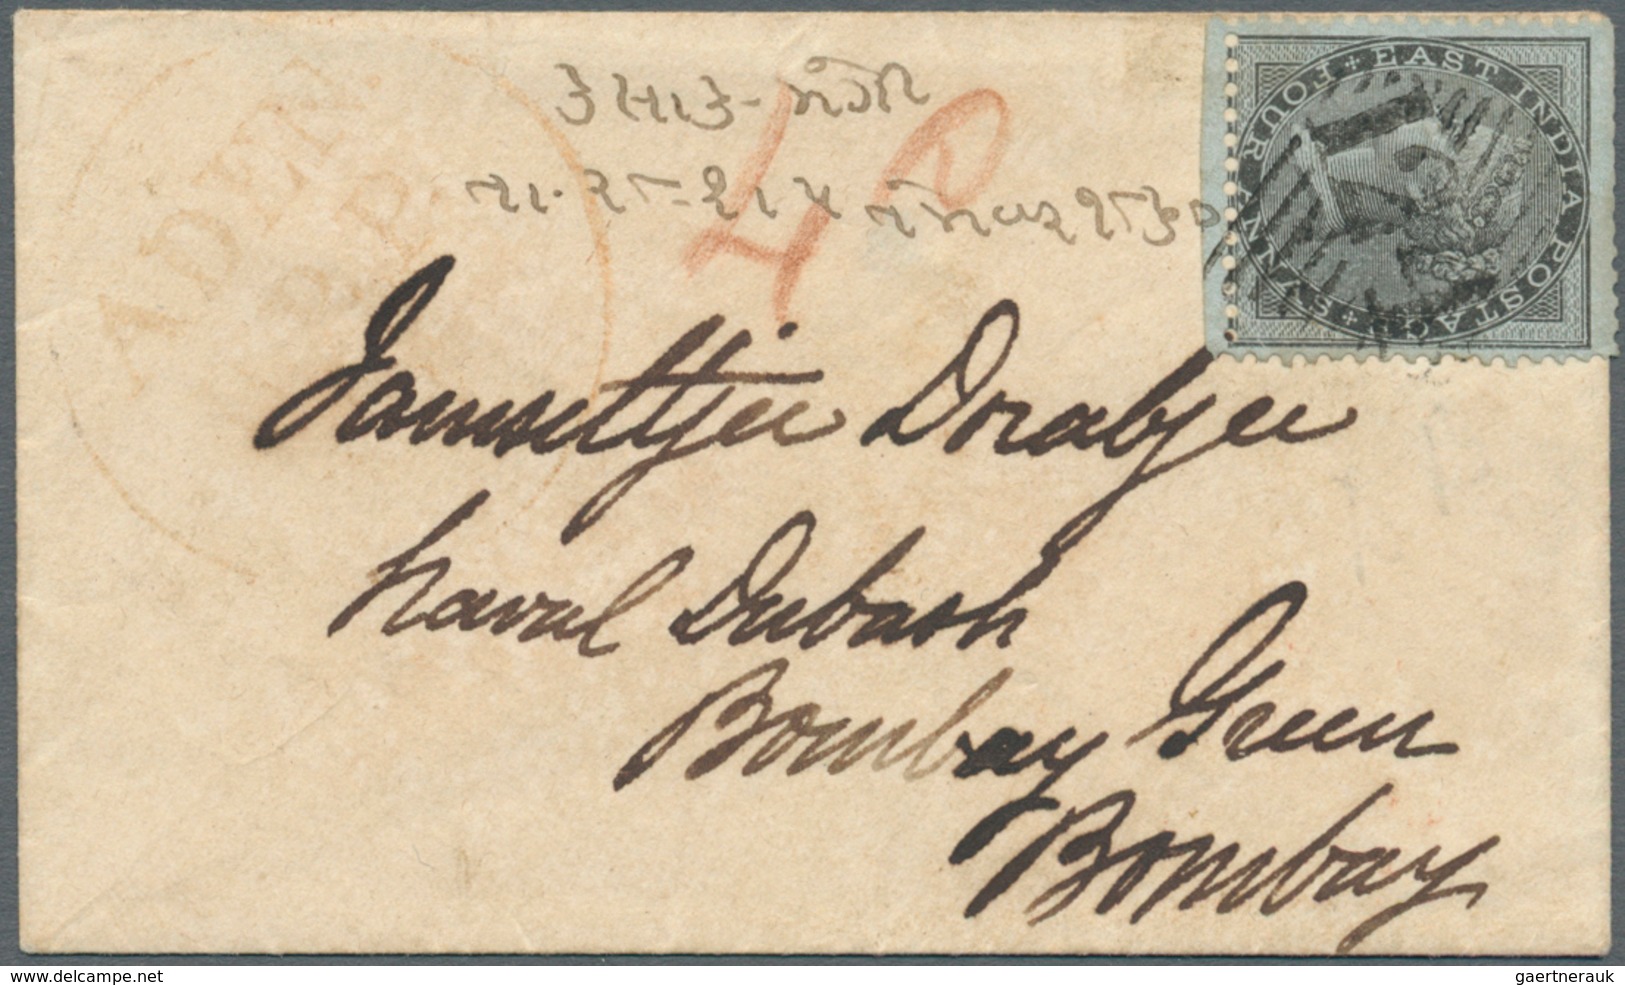 Aden: ADEN 1855-60 Ca.: Small Cover Sent From Aden To Bombay Franked By India 1855 4a. Black On Blui - Aden (1854-1963)